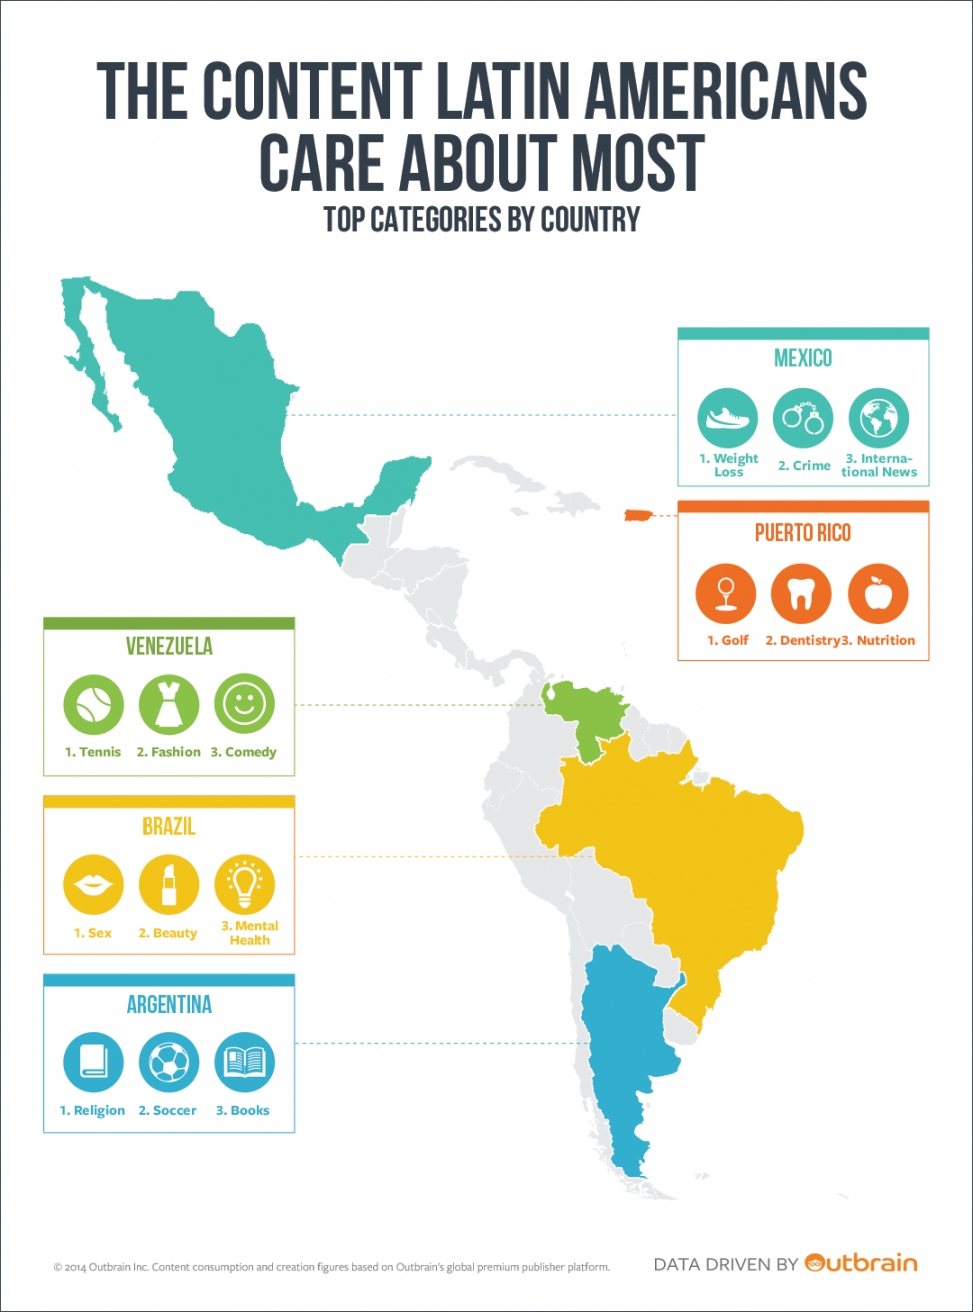 What content matters most in Latin America?